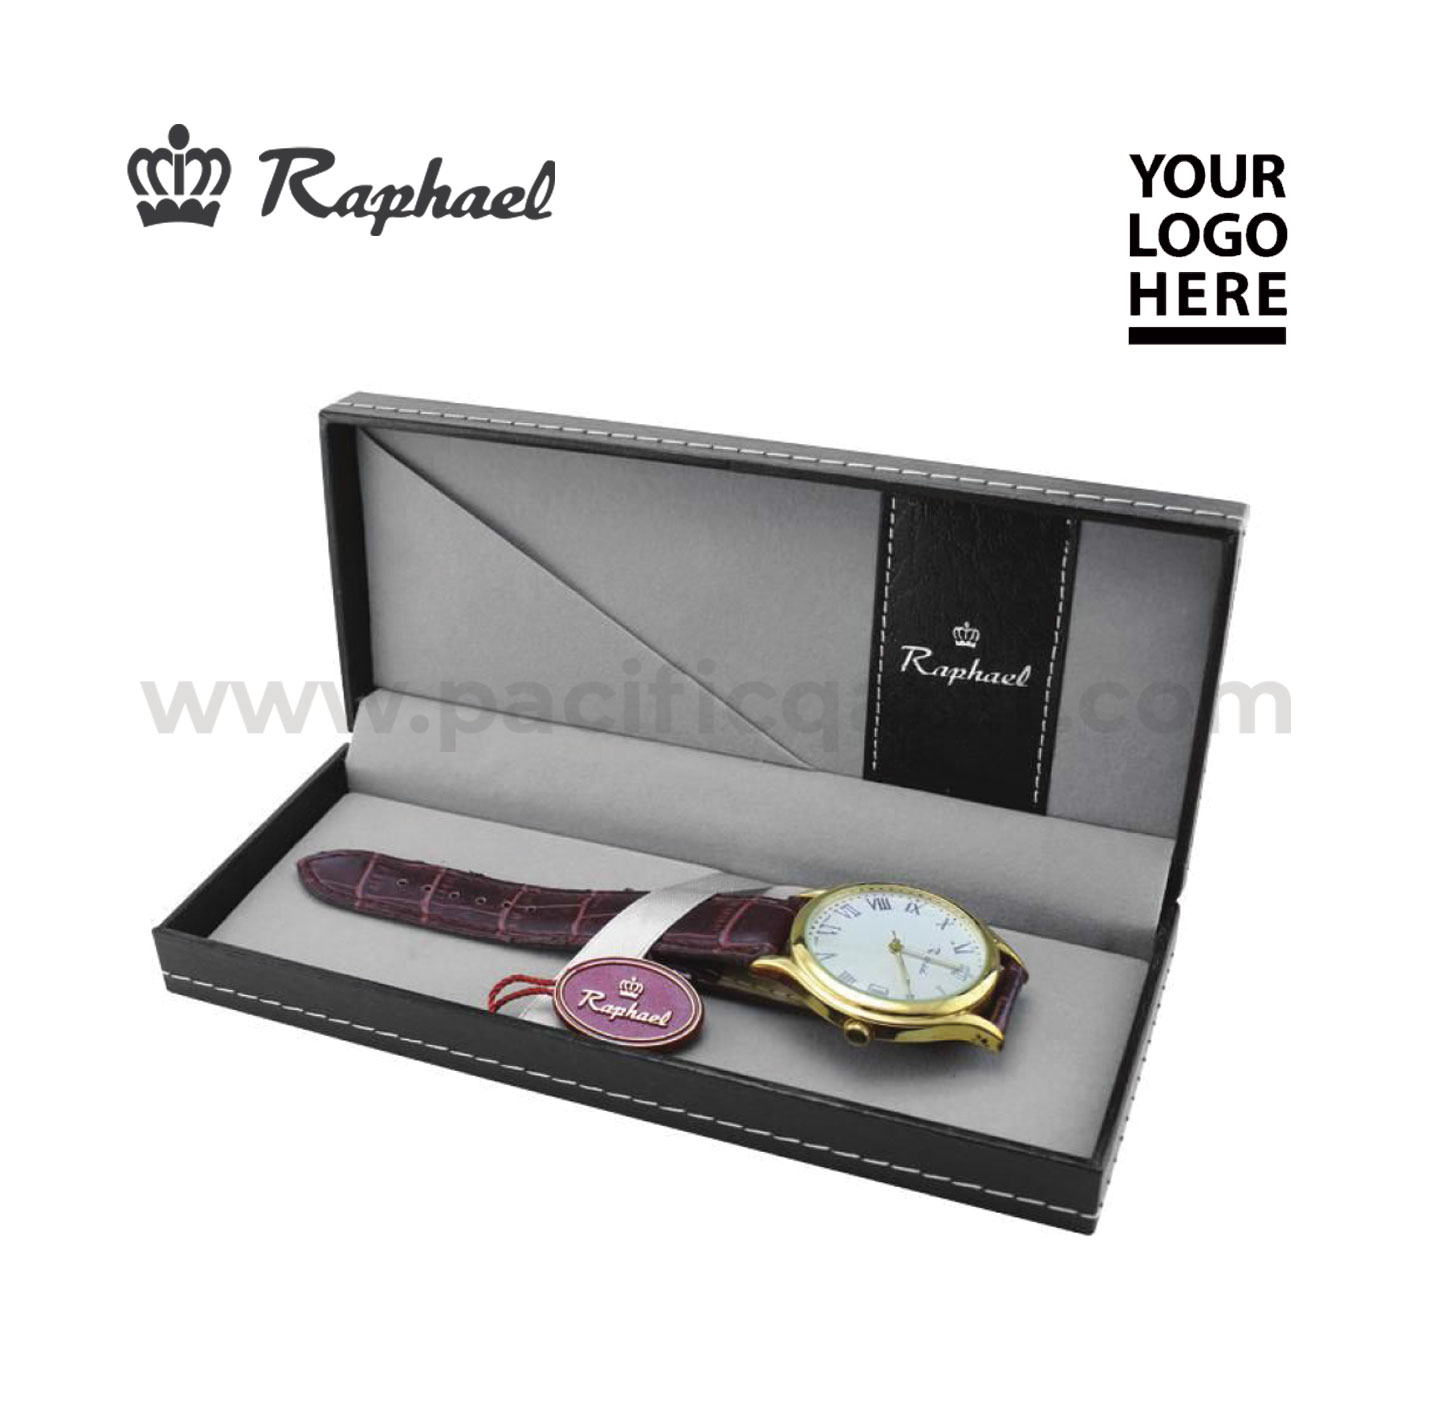 Raphael Watches in gift box